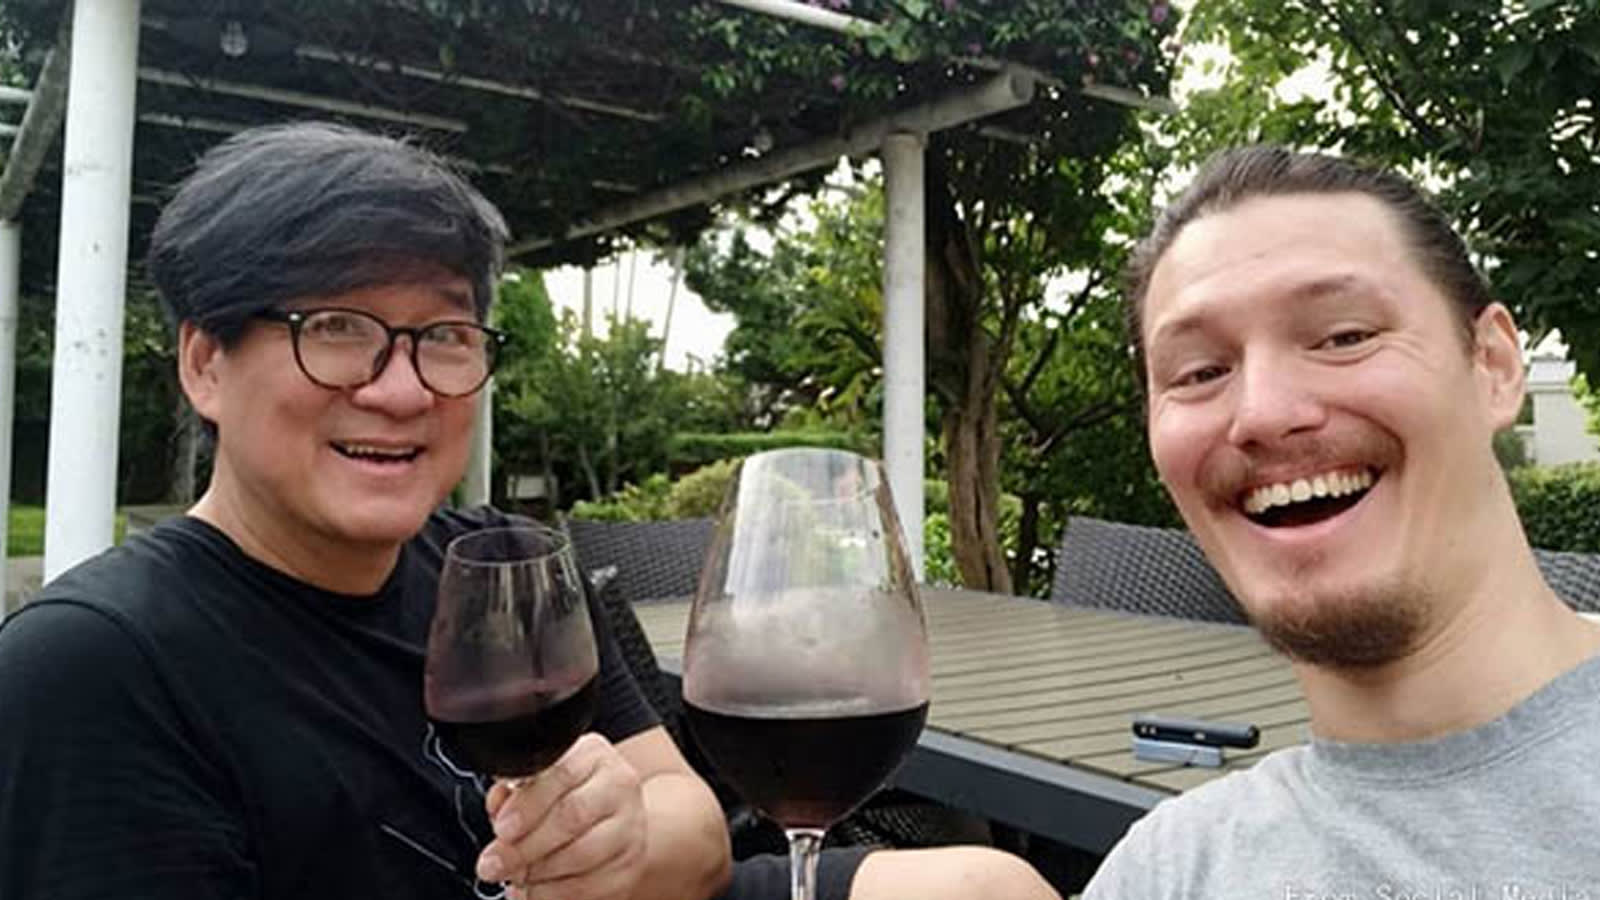 Wakin Chau, 60, Praised For Looking Young Next To His 31-Year-Old Son